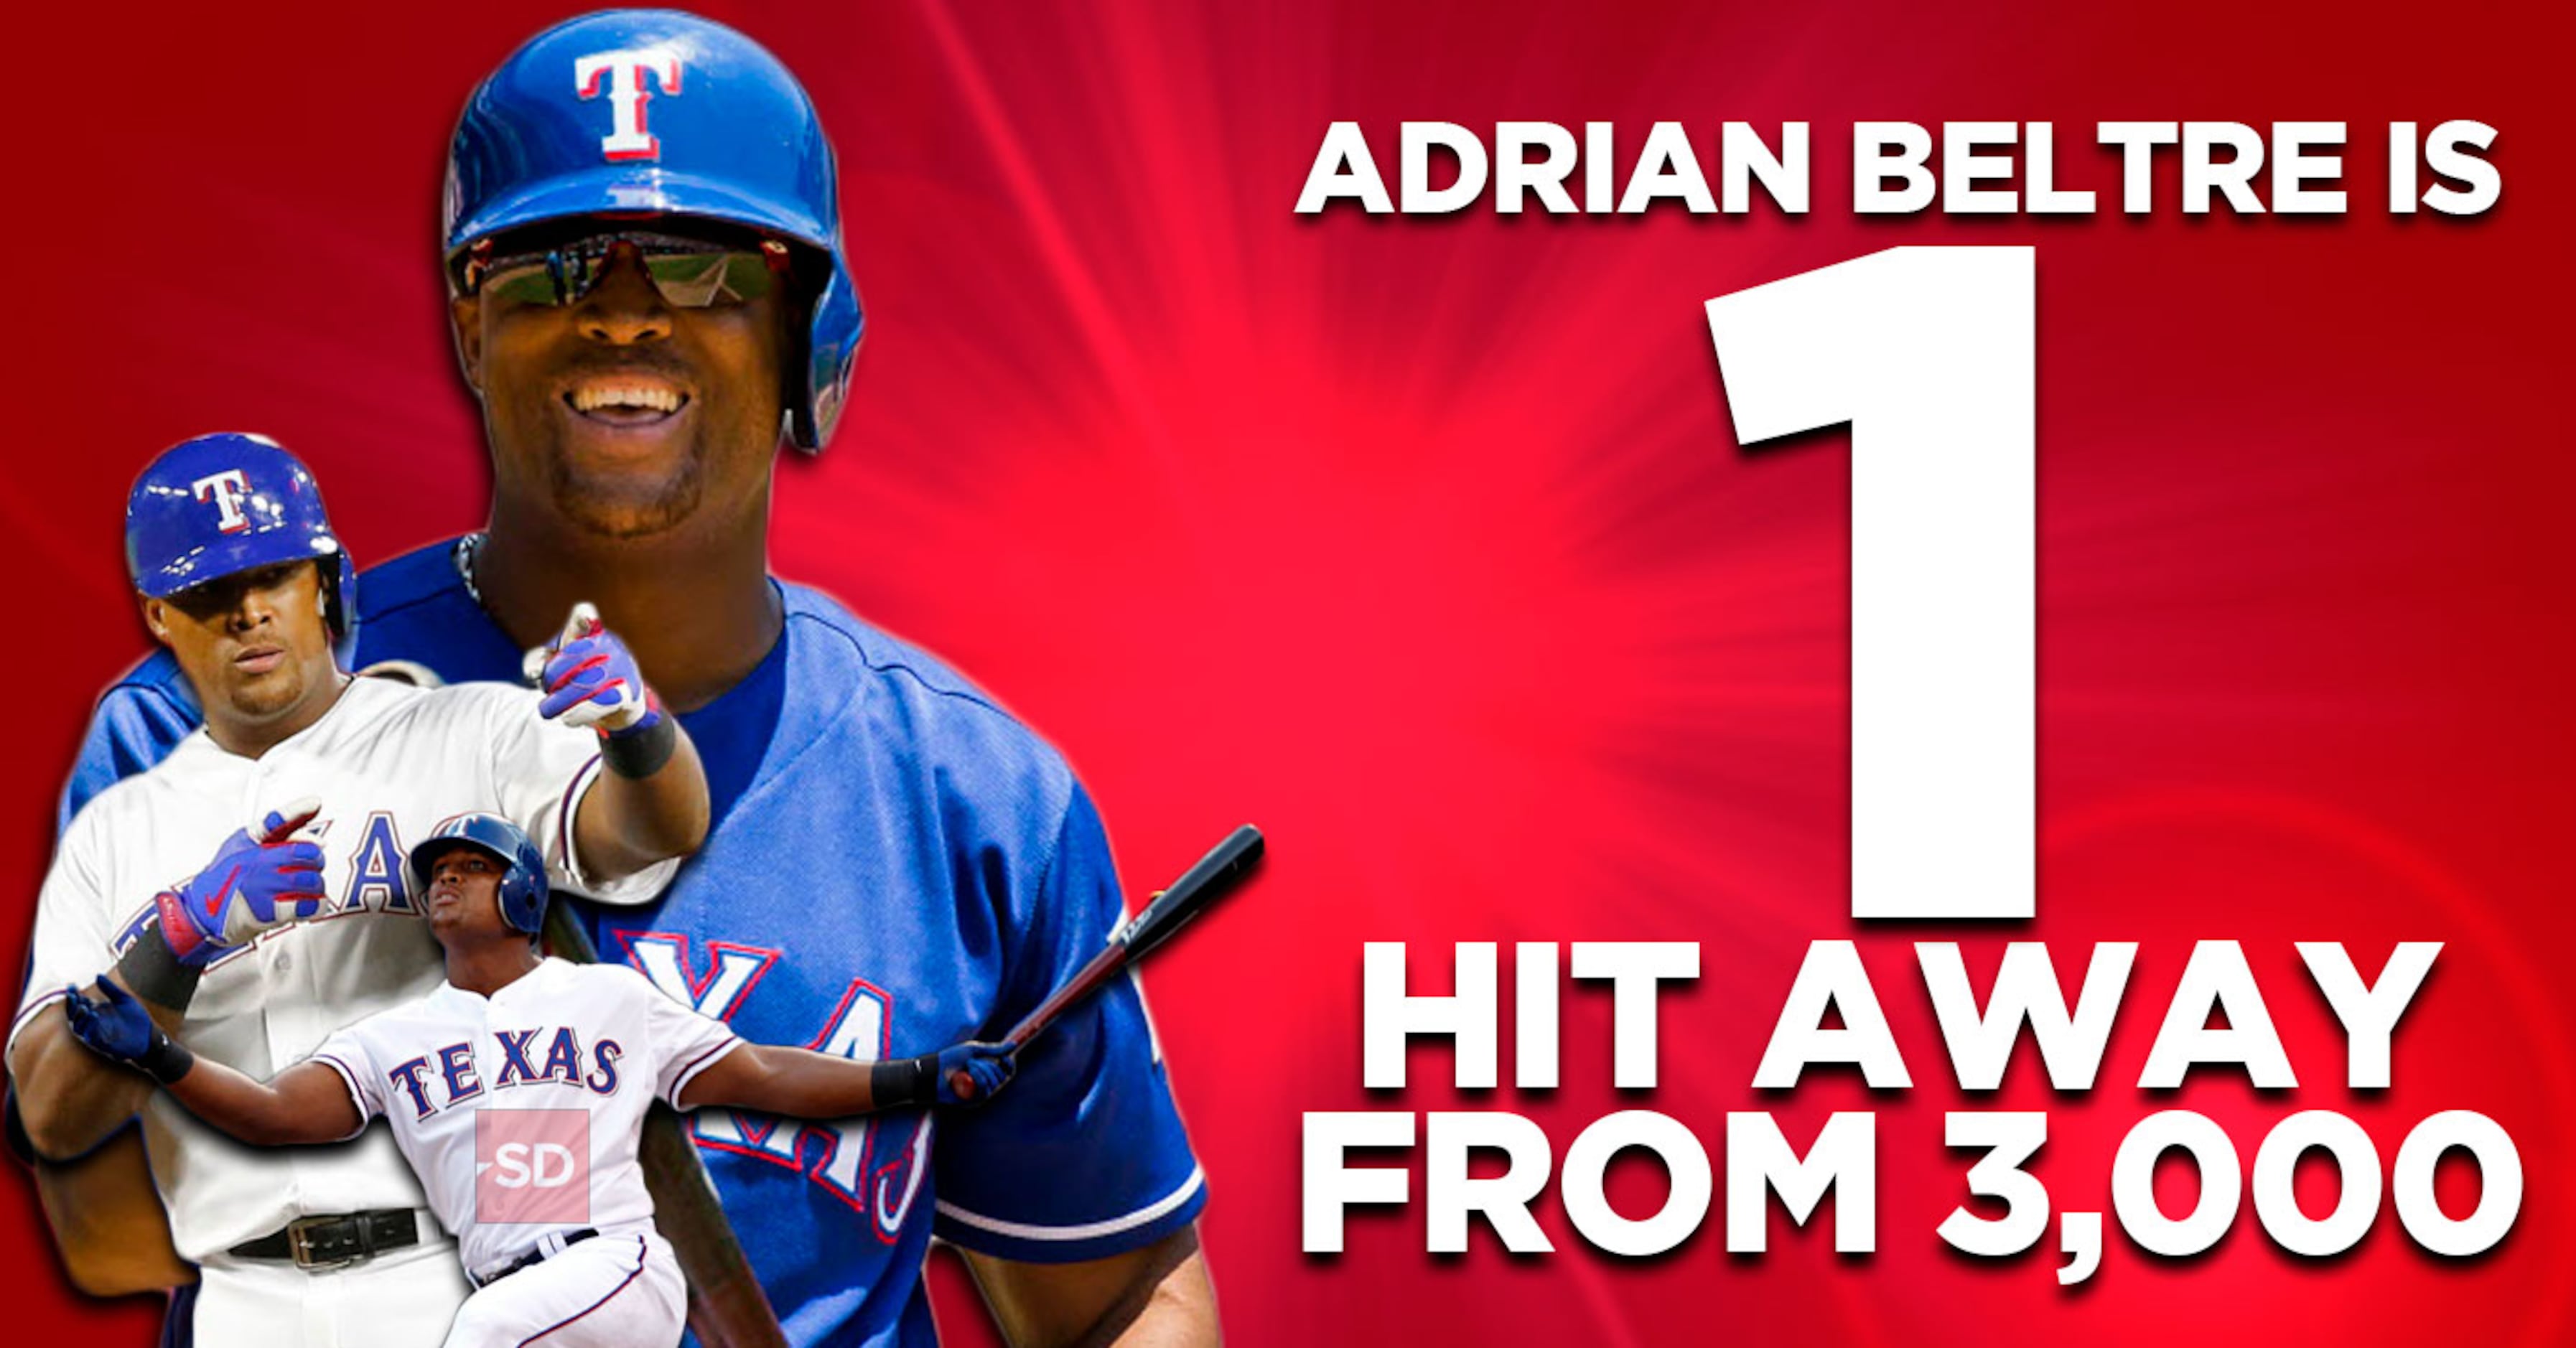 Counting down to Texas Rangers 3B Adrian Beltre's 3,000th hit